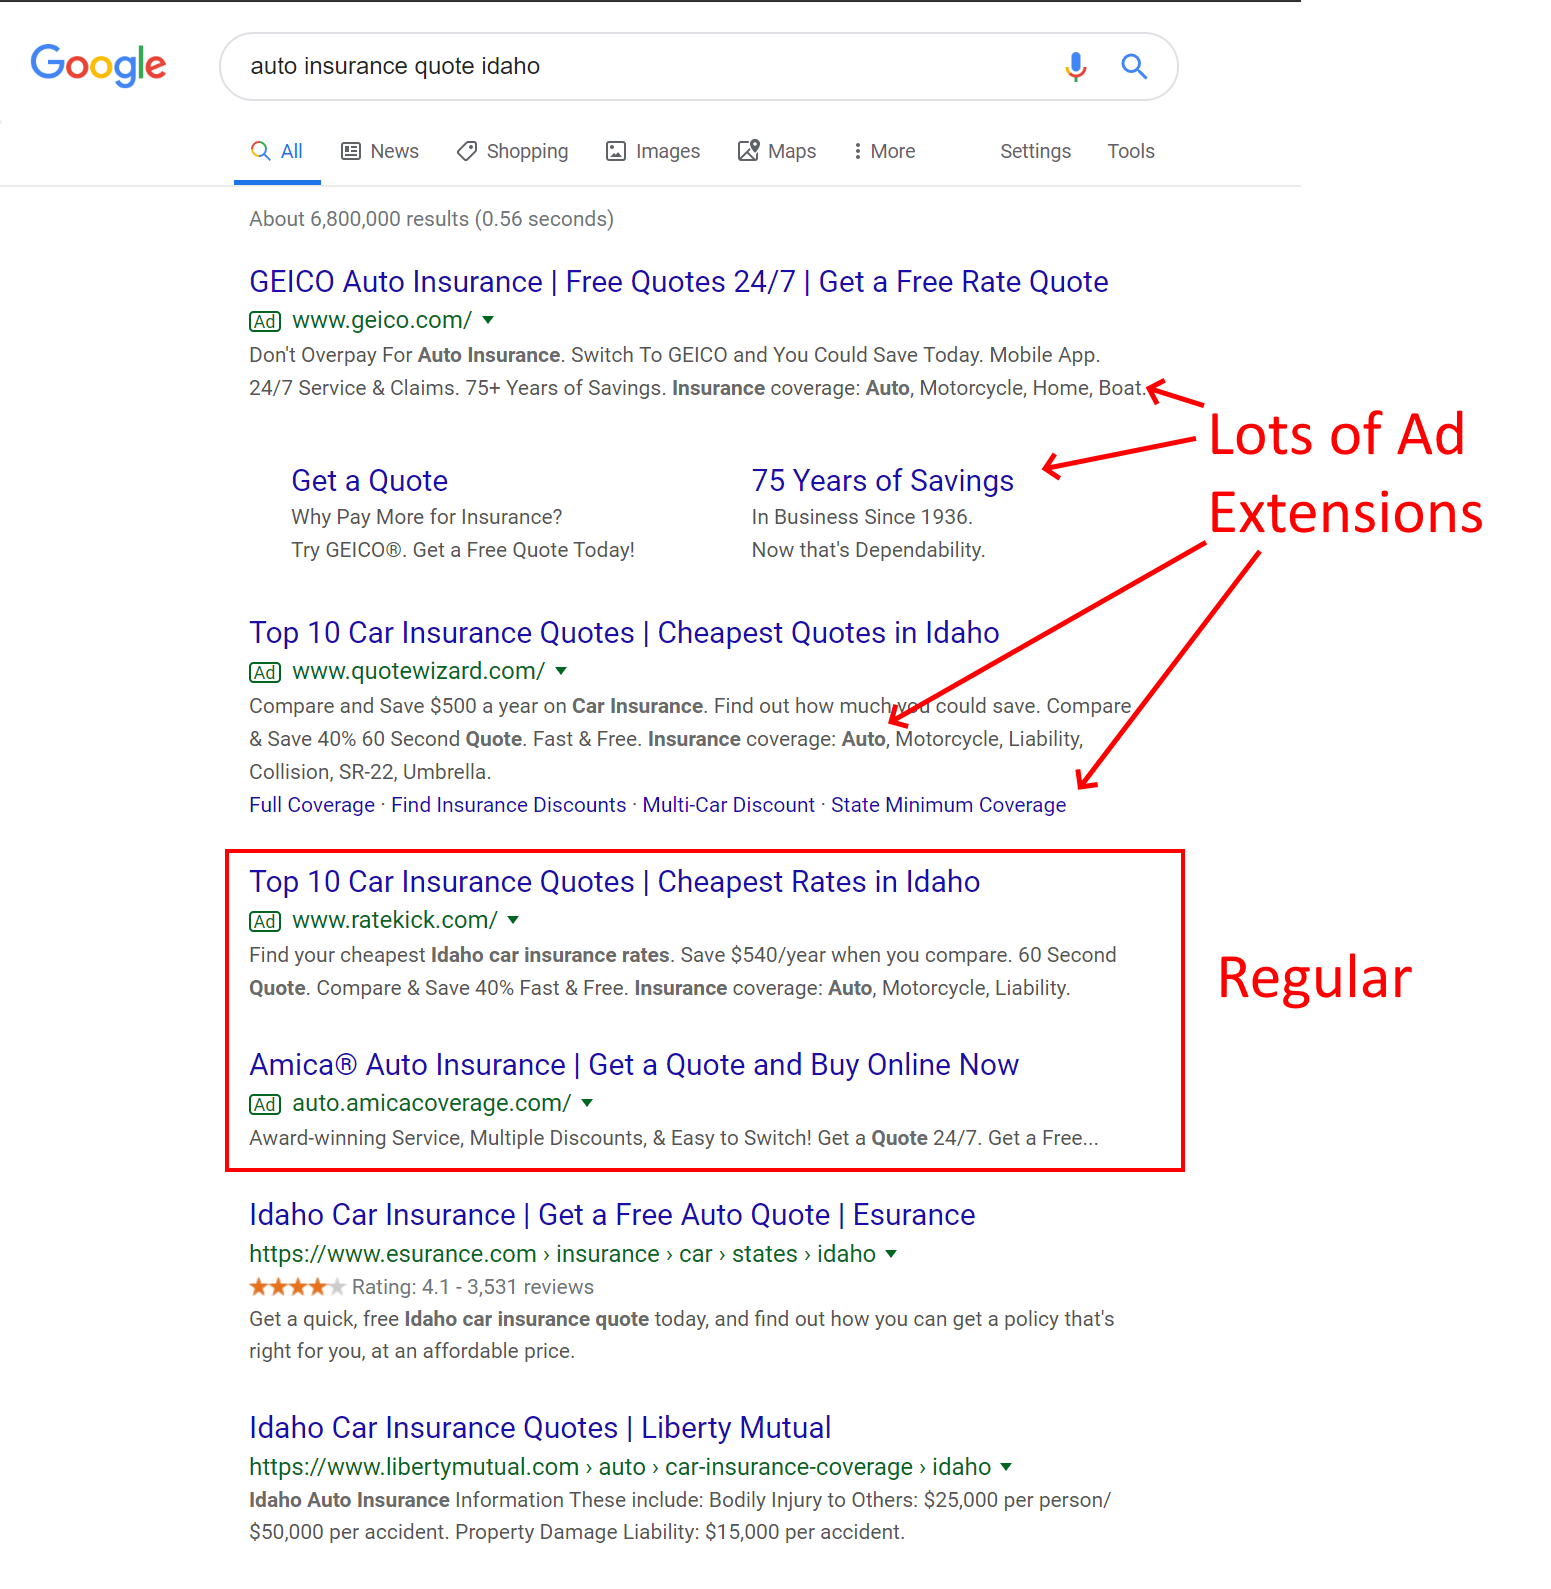 Google Ads Now Includes Location